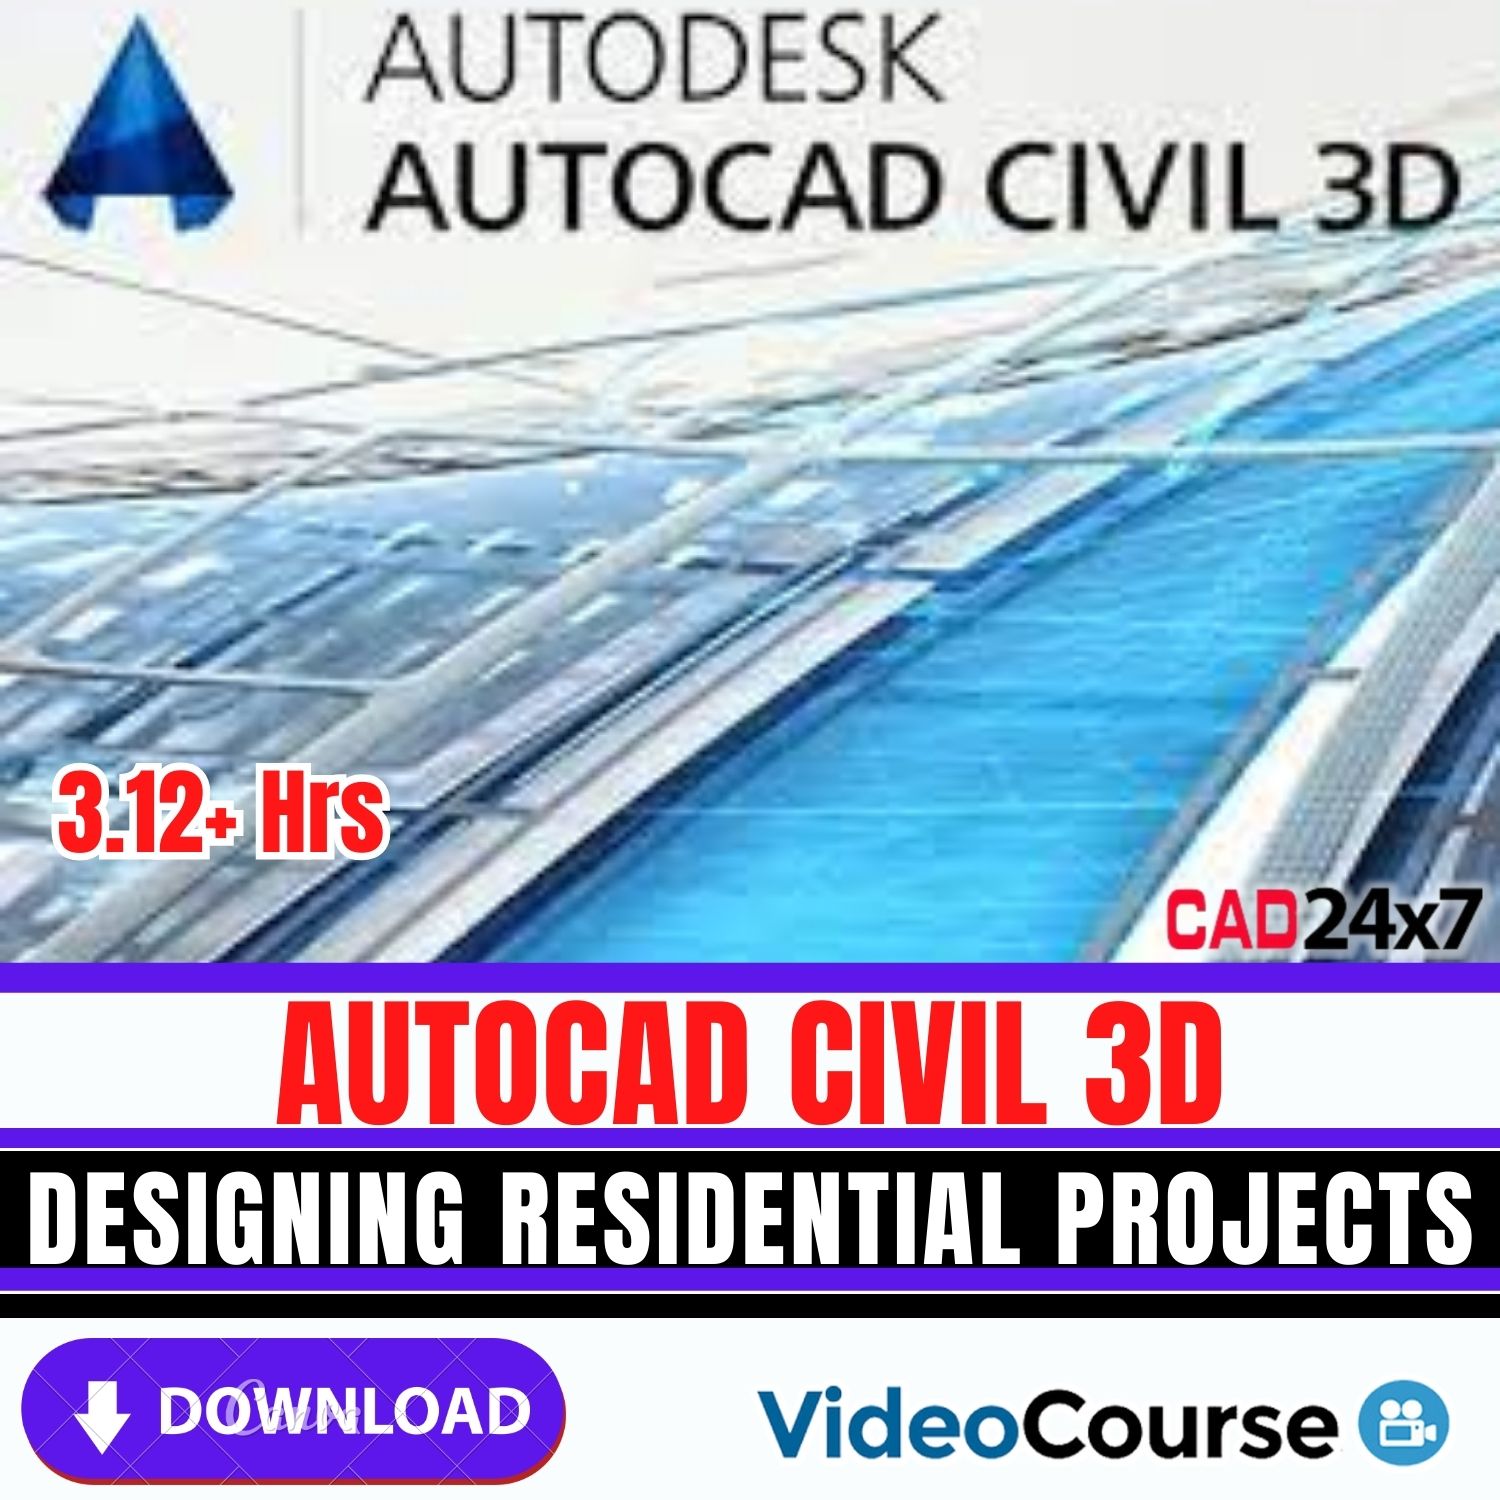 AutoCAD Civil 3D Designing Residential Projects